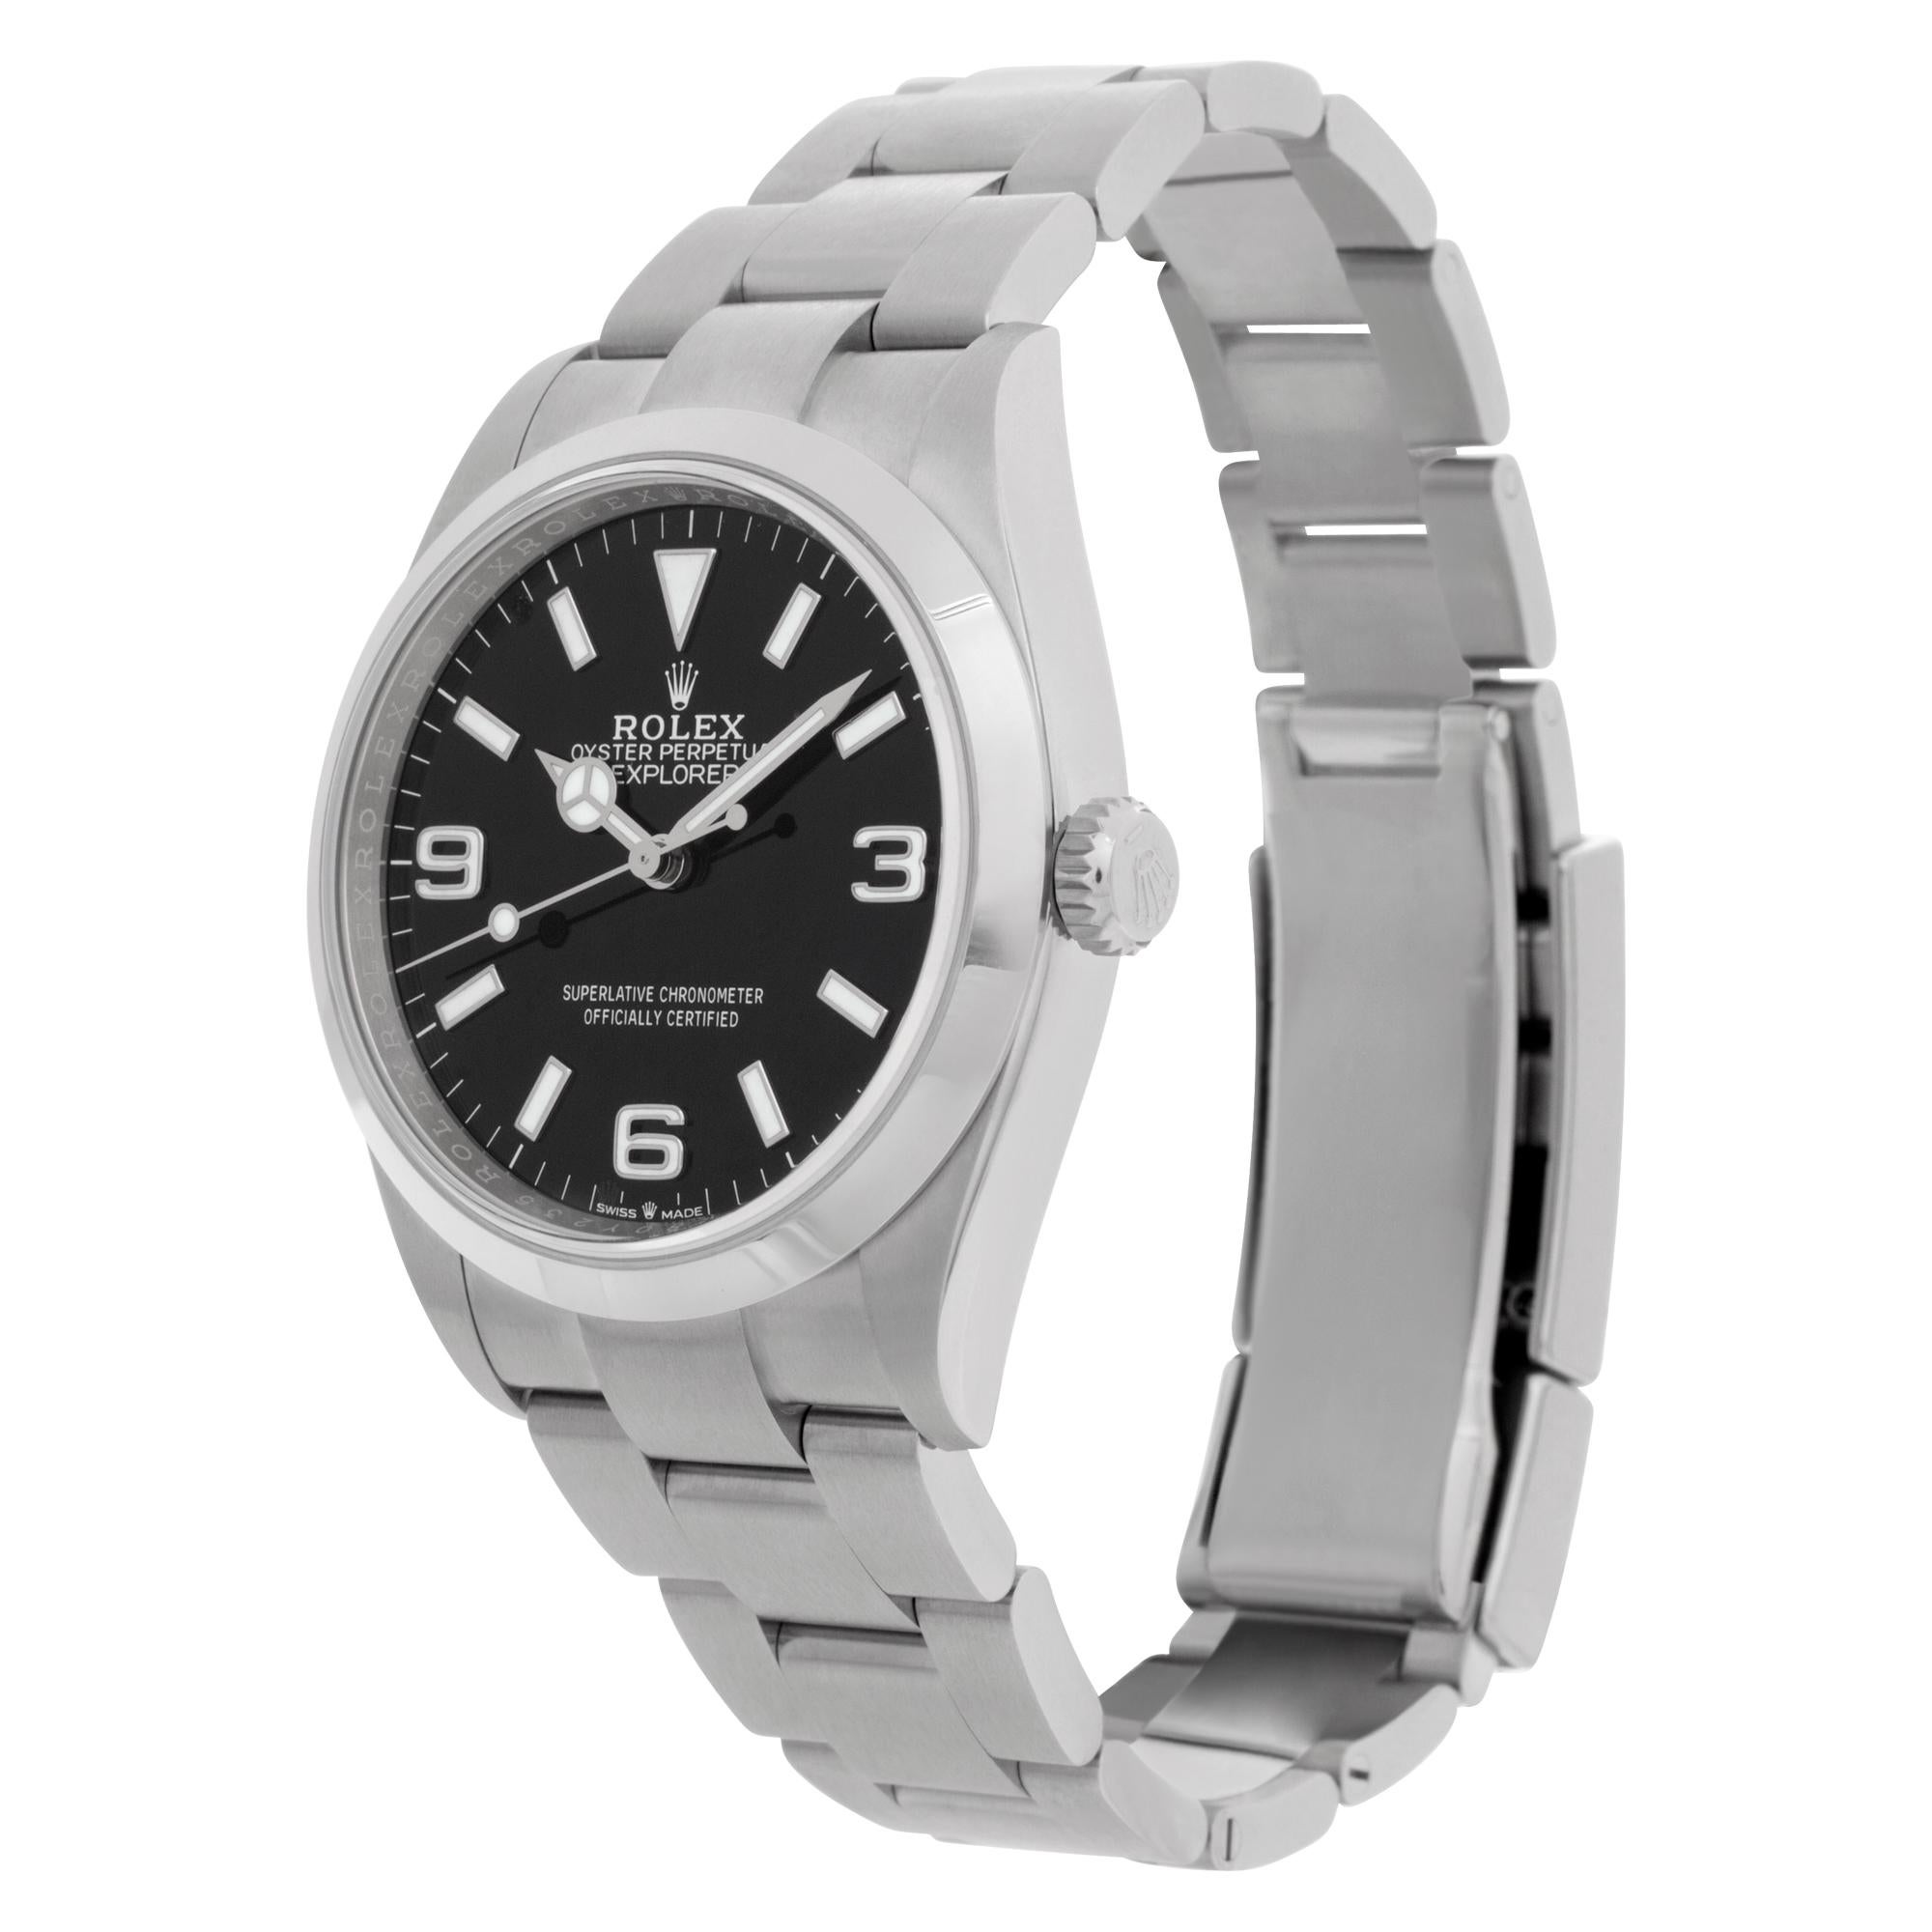 NEW 2021 Rolex Explorer in stainless steel. Auto w/ sweep seconds. 36 mm case size. With papers. **Bank wire only at this price** Ref 124270. Circa 2021. Fine Pre-owned Rolex Watch.

Certified preowned Sport Rolex Explorer 124270 watch is made out